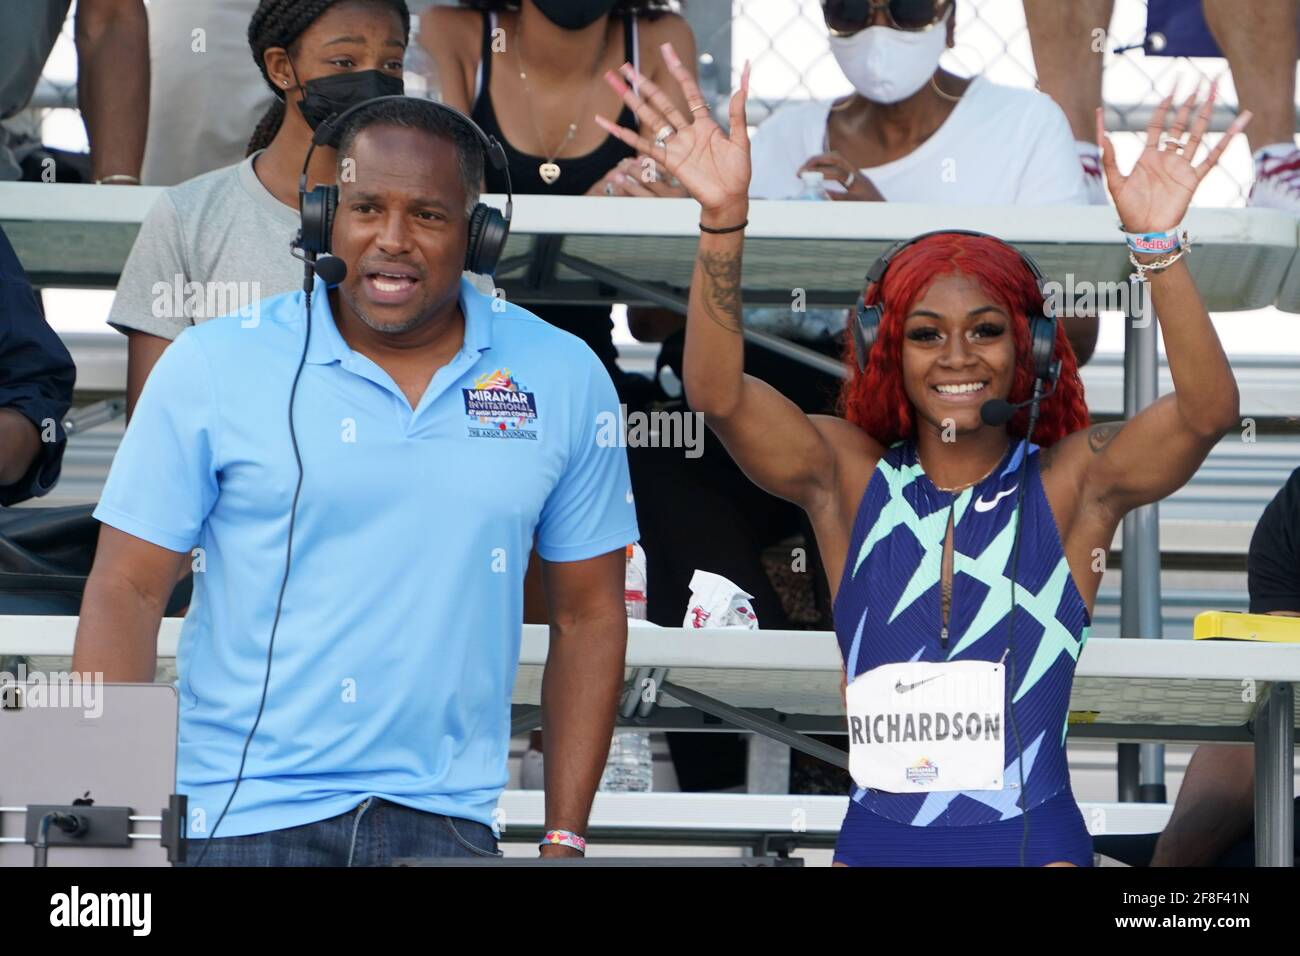 Sha'Carri Richardson (USA), right, is interviewed by NBC Sports broadcasters Ato Boldon after winning the women's 100m in 10.72  during the Miramar In Stock Photo